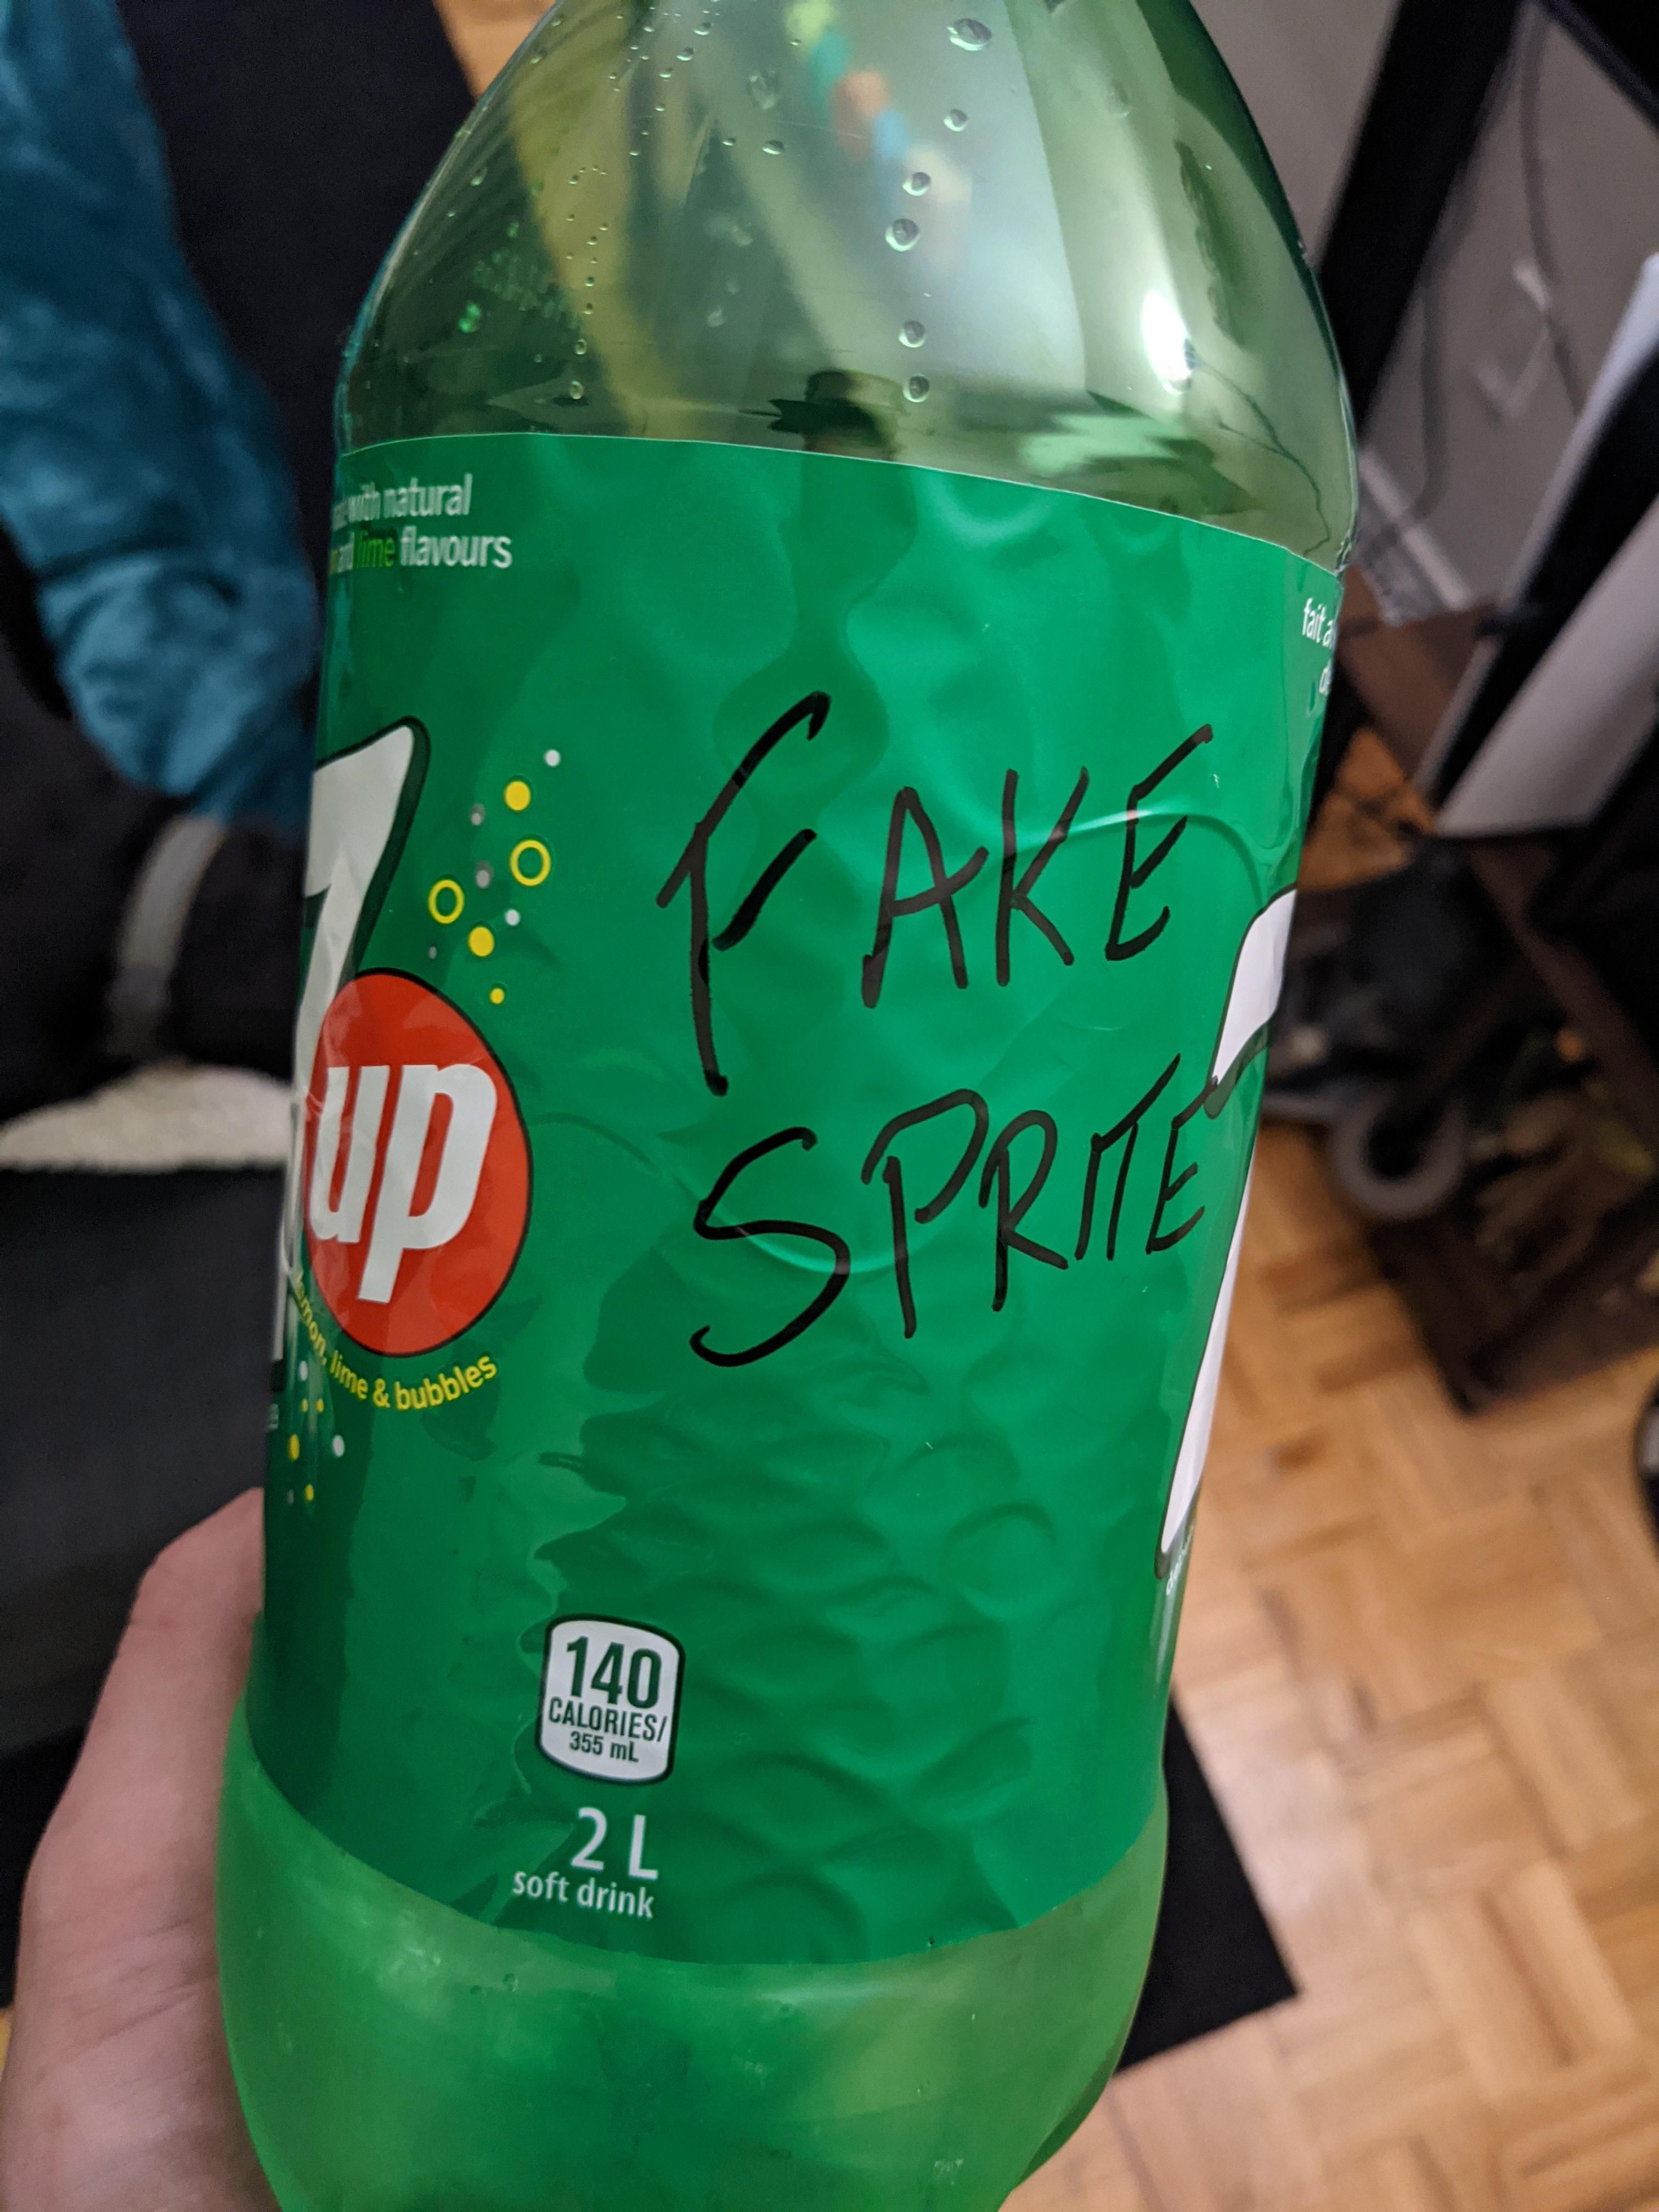 My wife wanted Sprite. I got her 7up. She wrote this on the bottle.